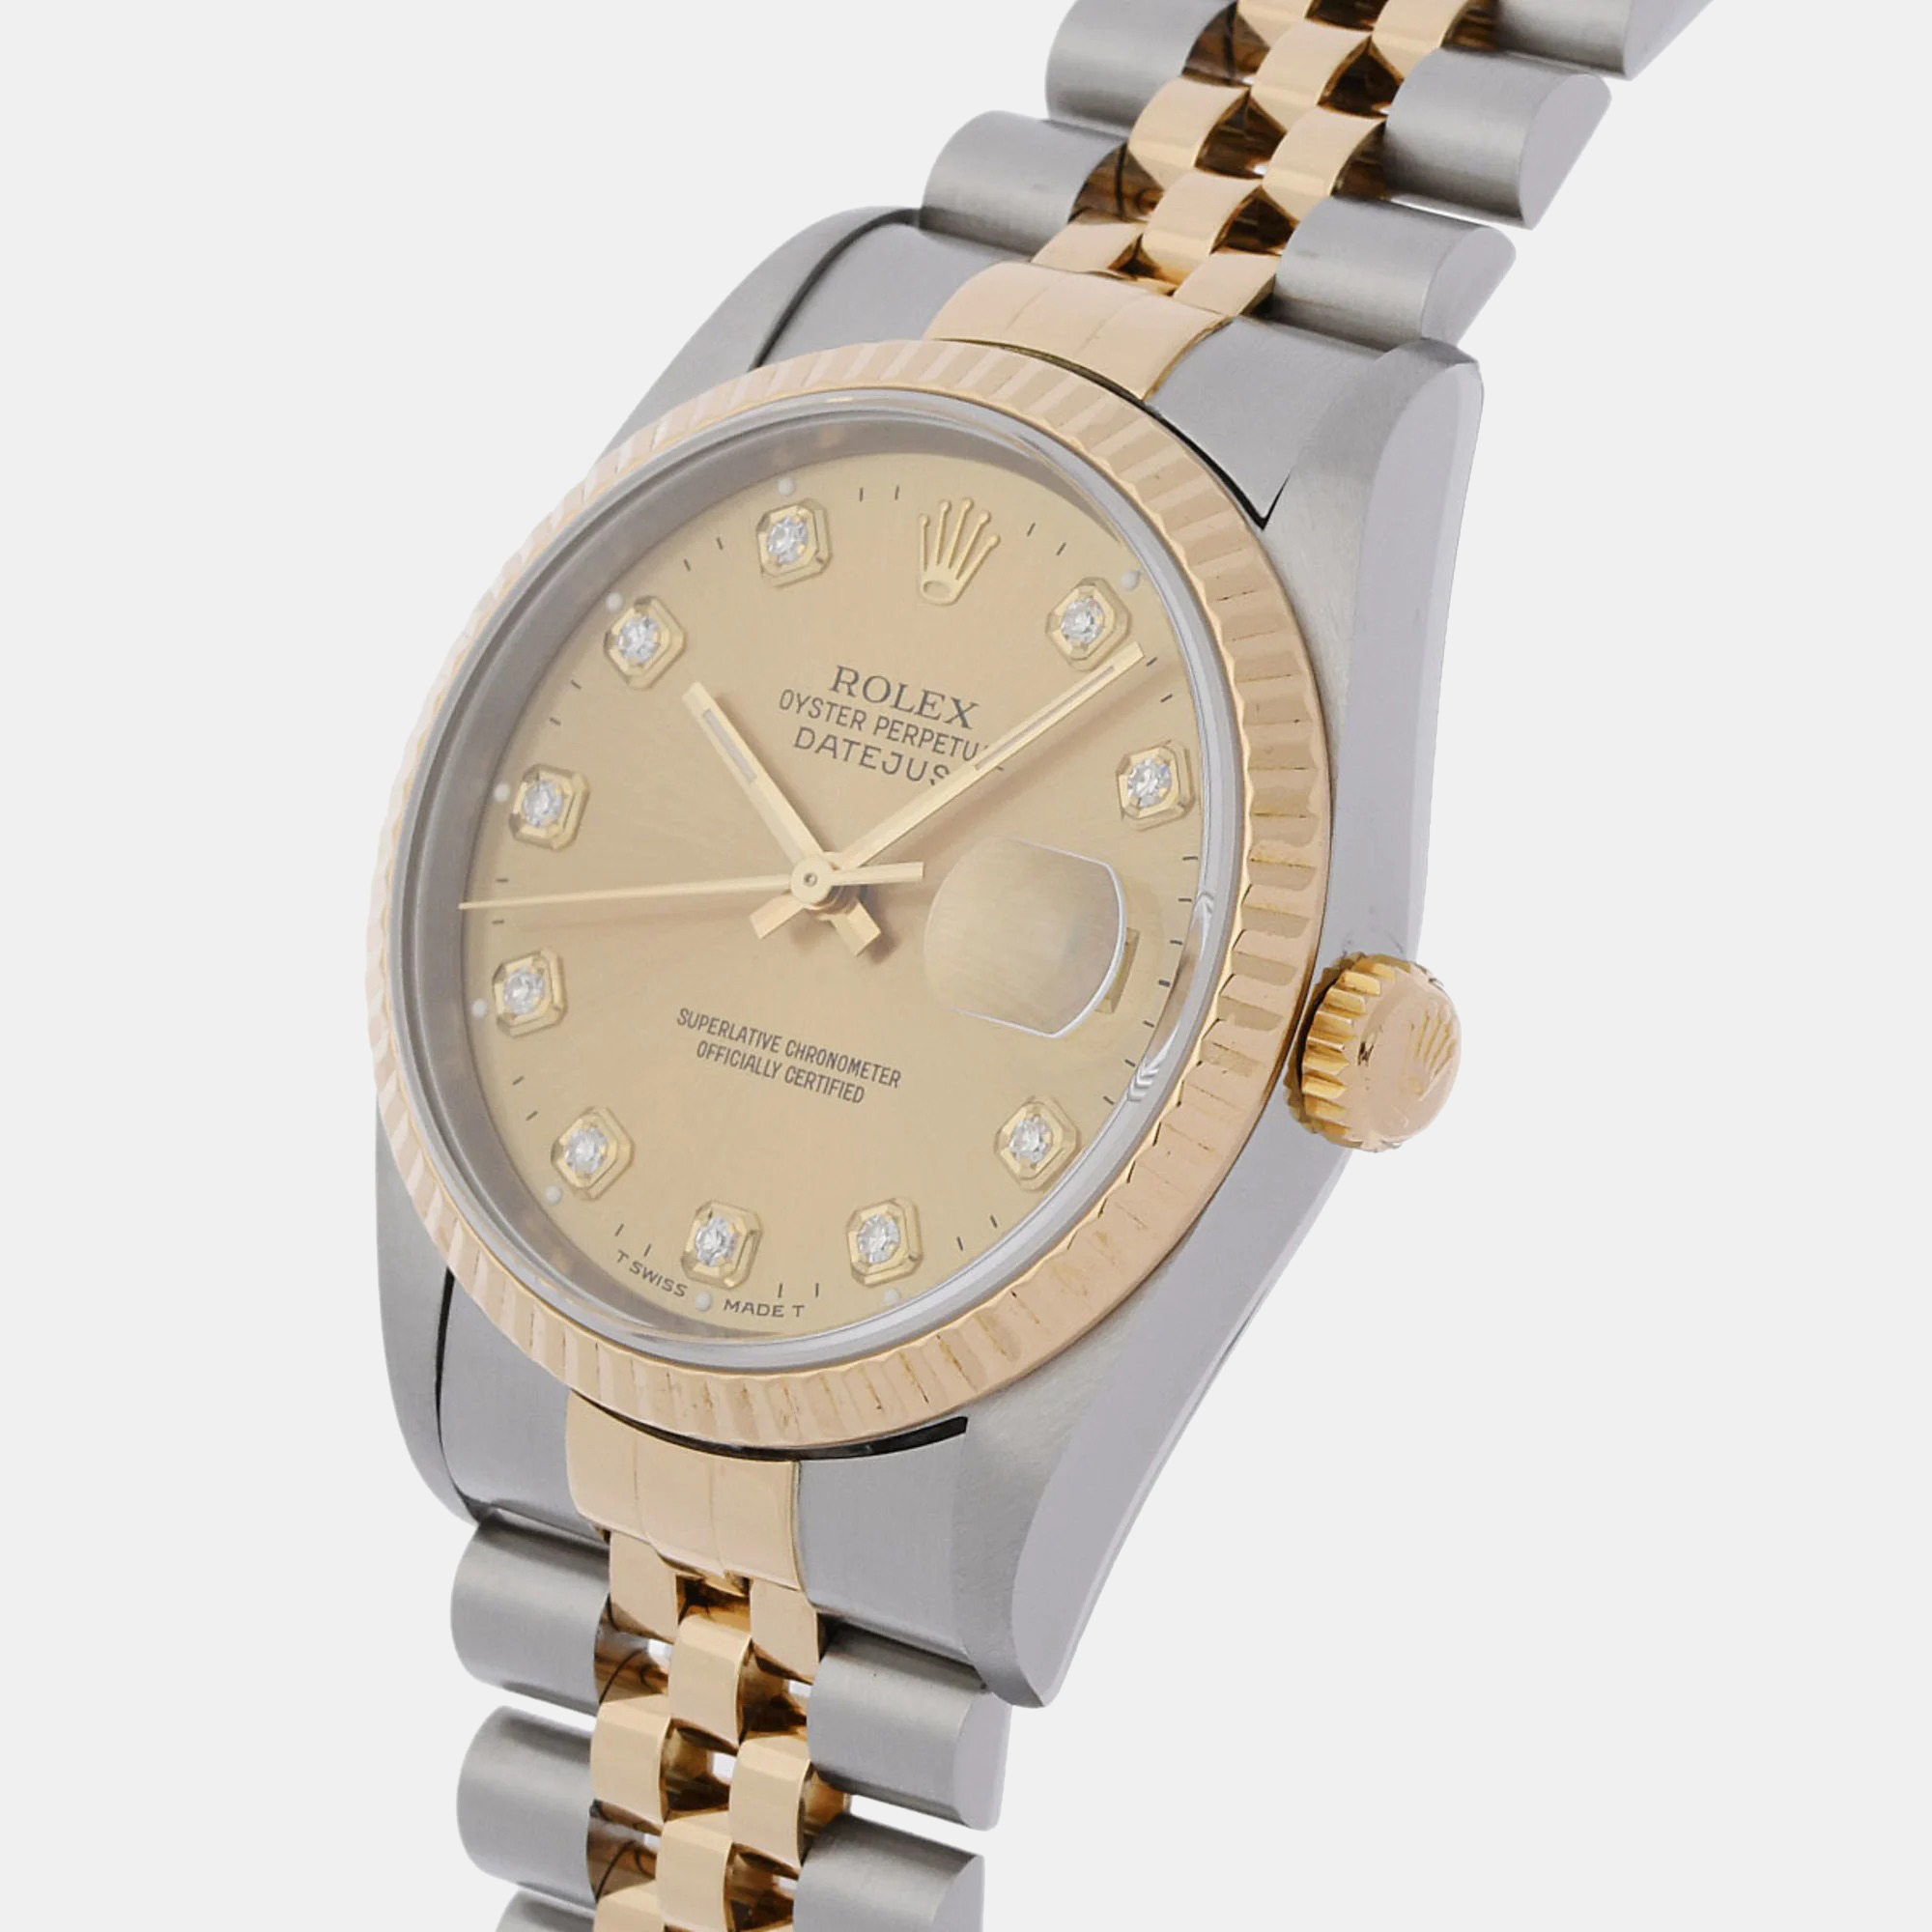 

Rolex Champagne Diamond 18k Yellow Gold Stainless Steel Datejust 16233 Automatic Men's Wristwatch 36 mm